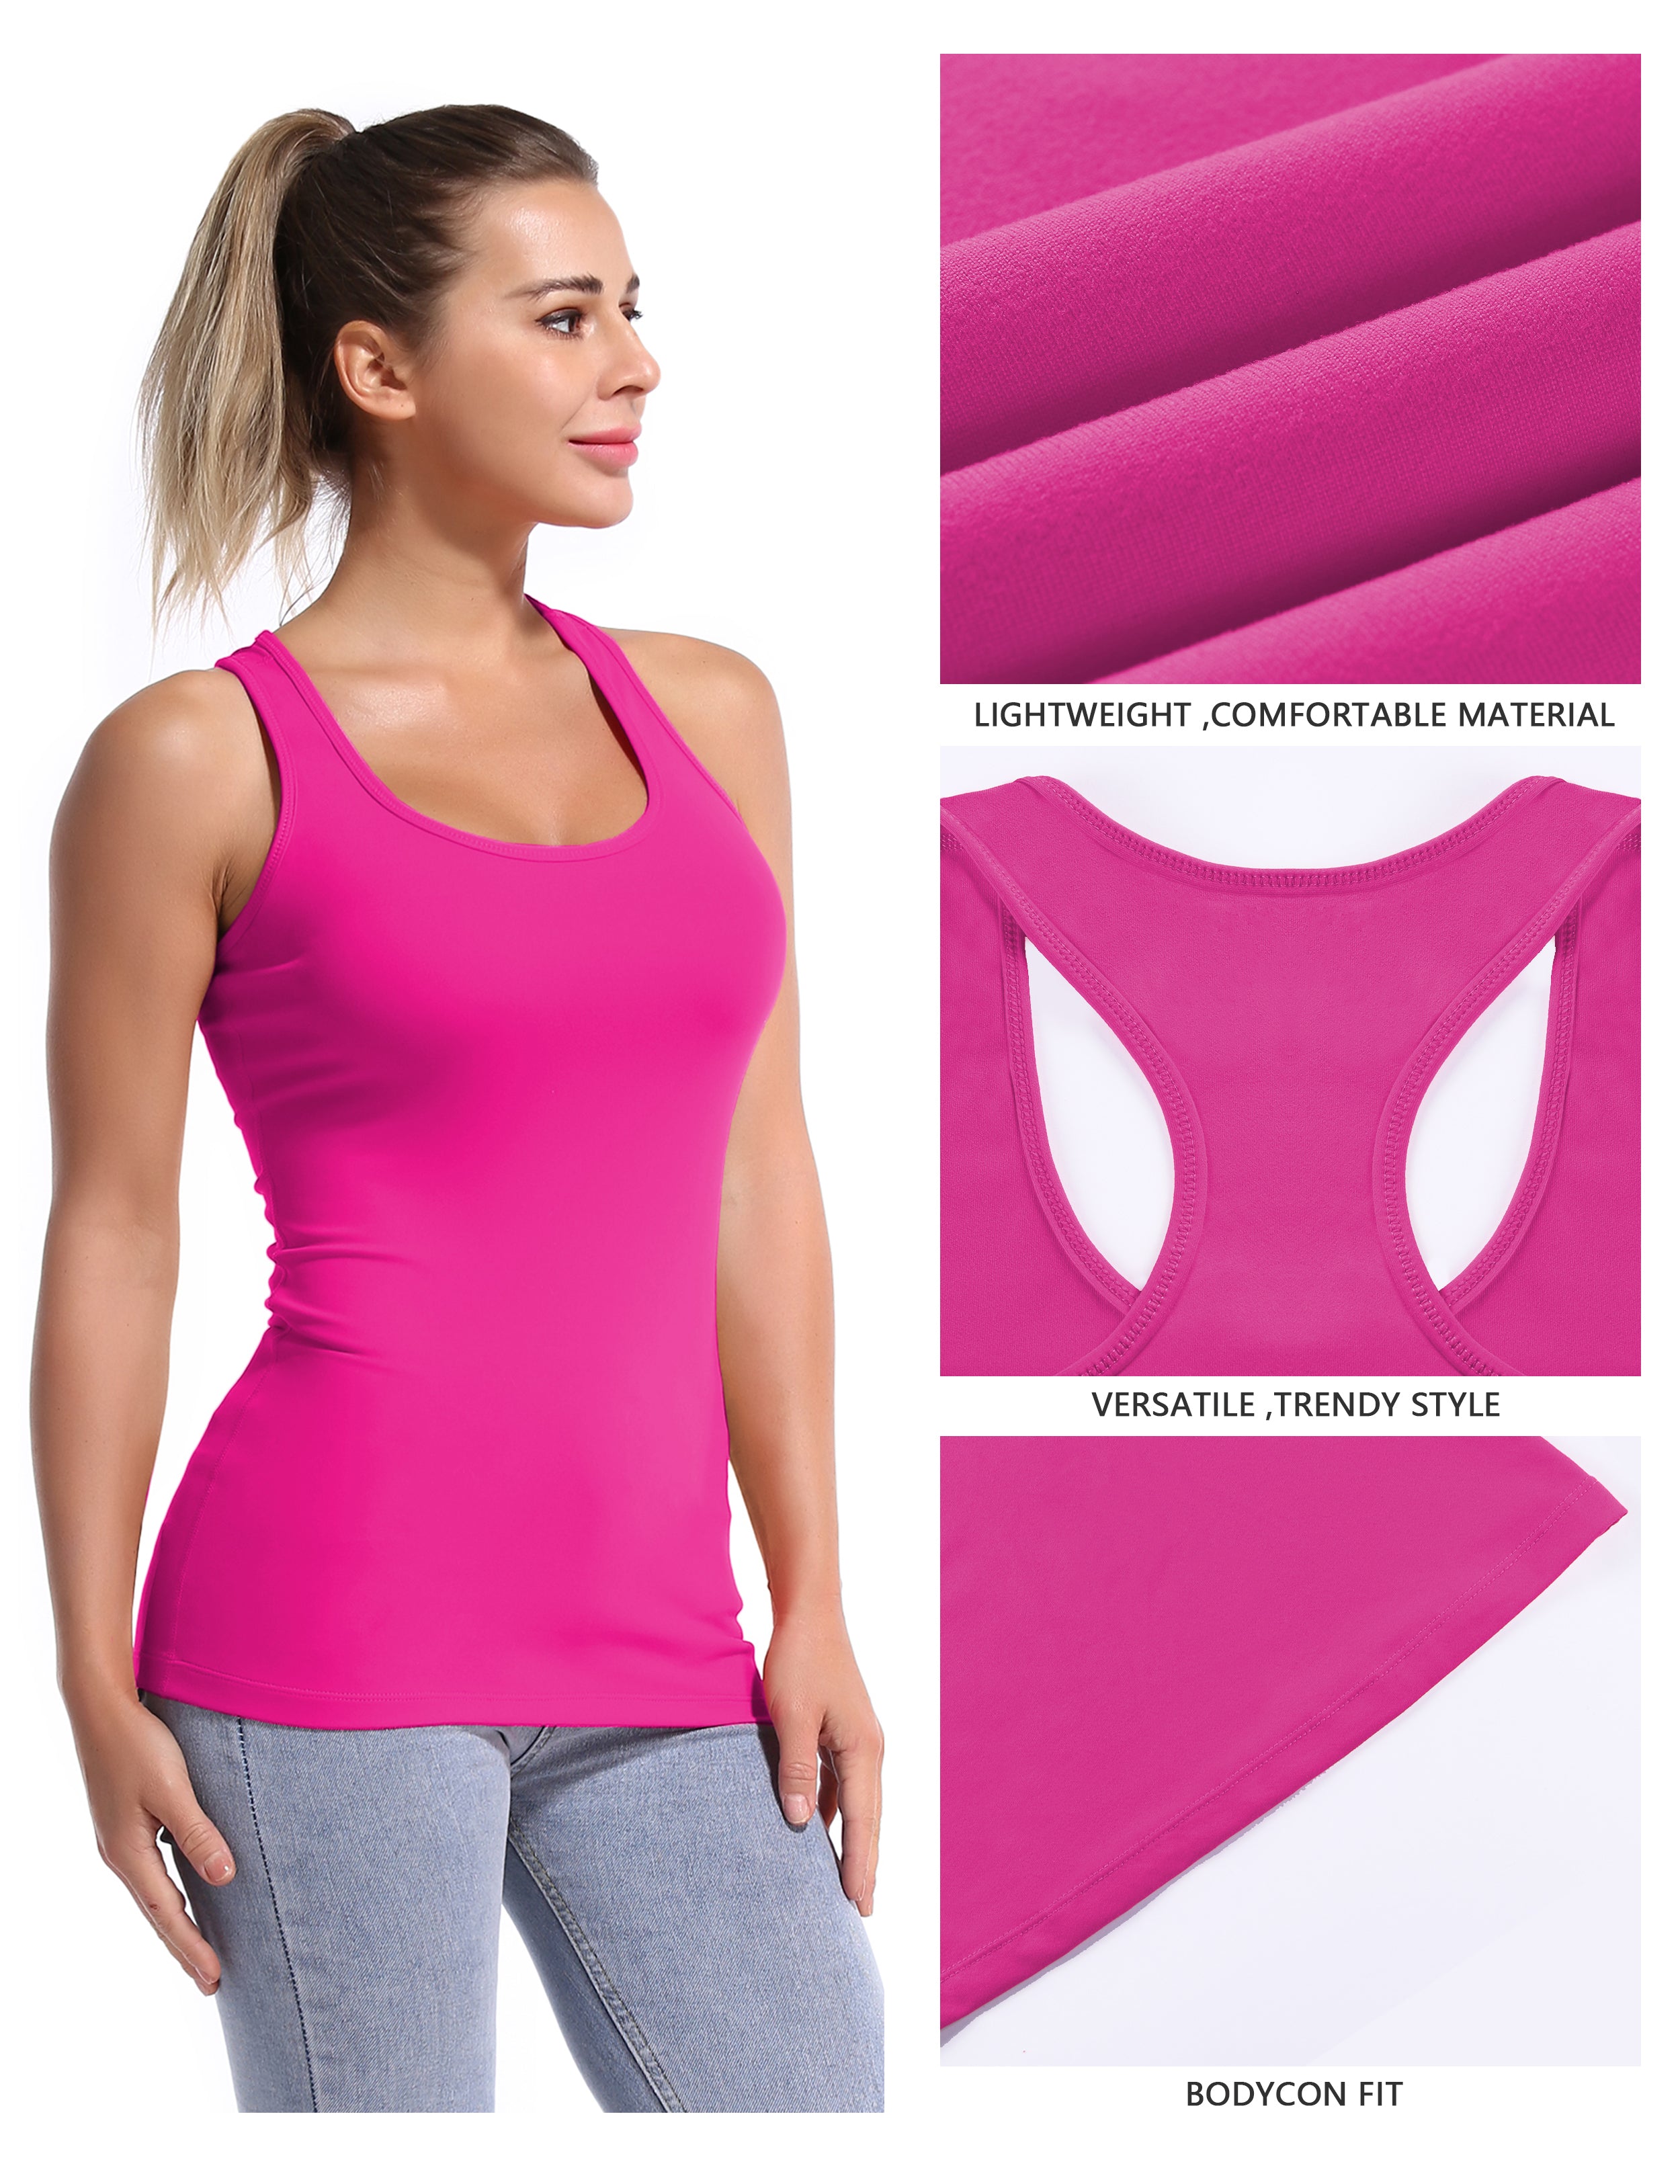 Racerback Athletic Tank Tops magenta 92%Nylon/8%Spandex(Cotton Soft) Designed for Pilates Tight Fit So buttery soft, it feels weightless Sweat-wicking Four-way stretch Breathable Contours your body Sits below the waistband for moderate, everyday coverage